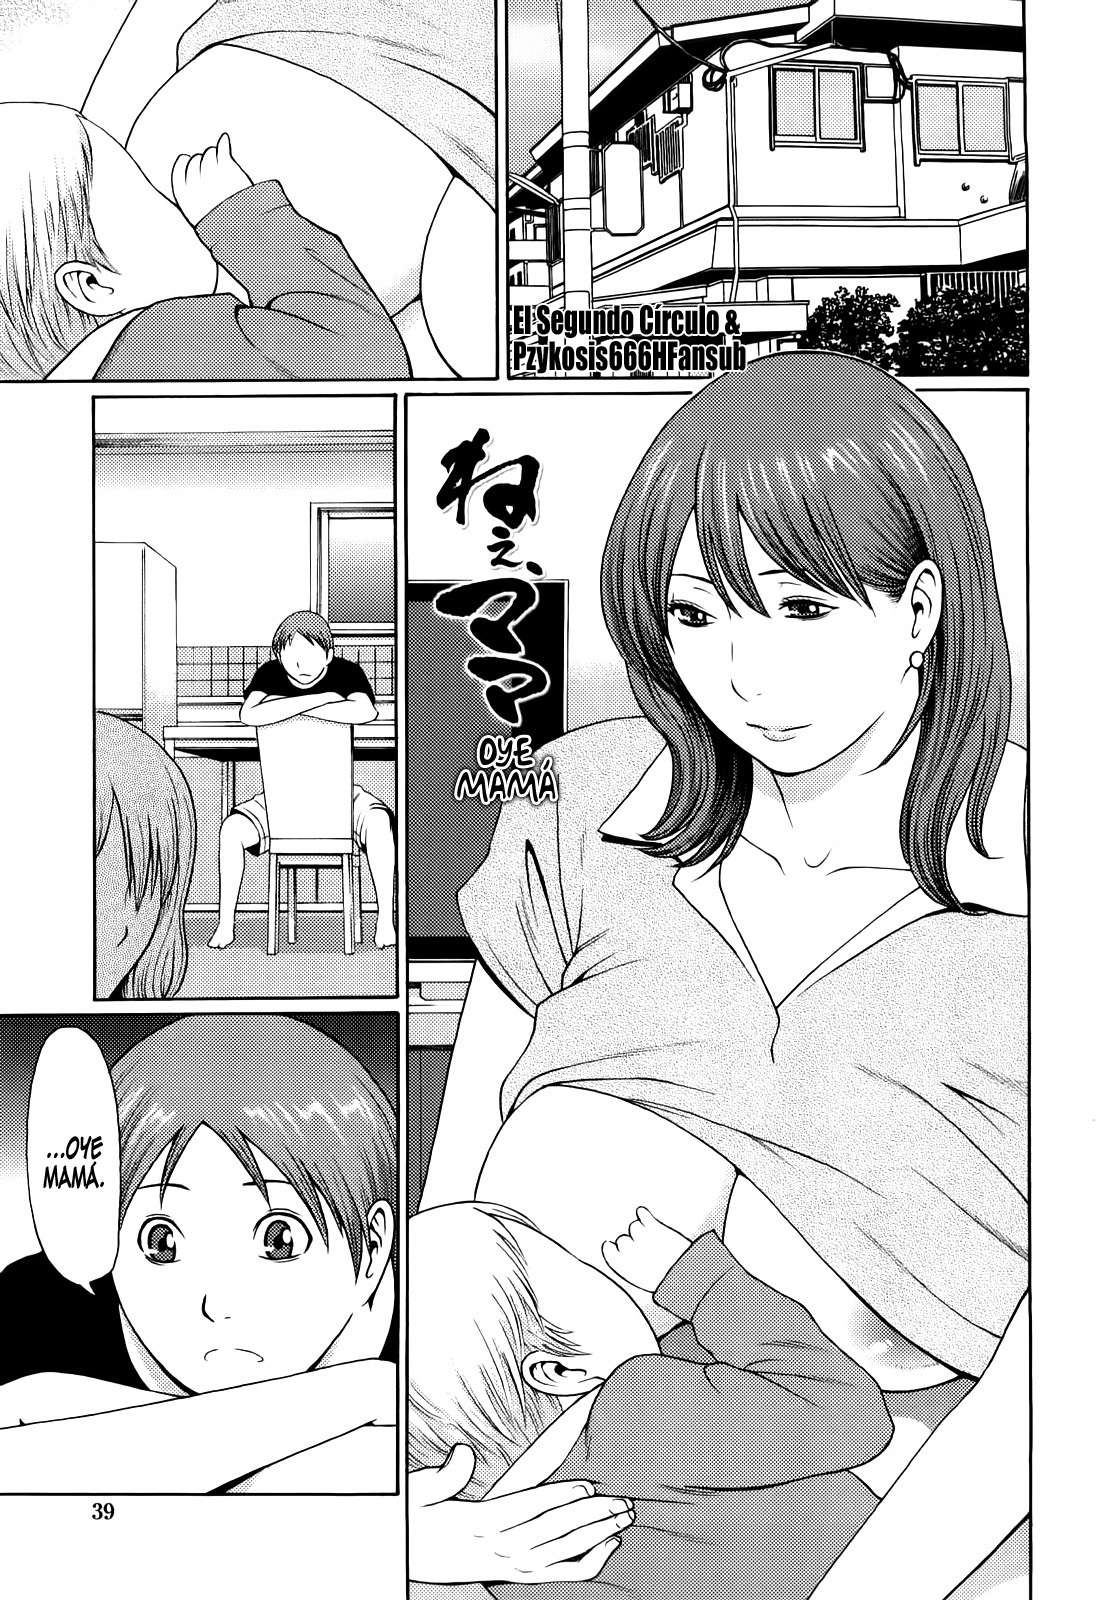 Immorality Love-Hole Completo (Sin Censura) Chapter-3 - 0